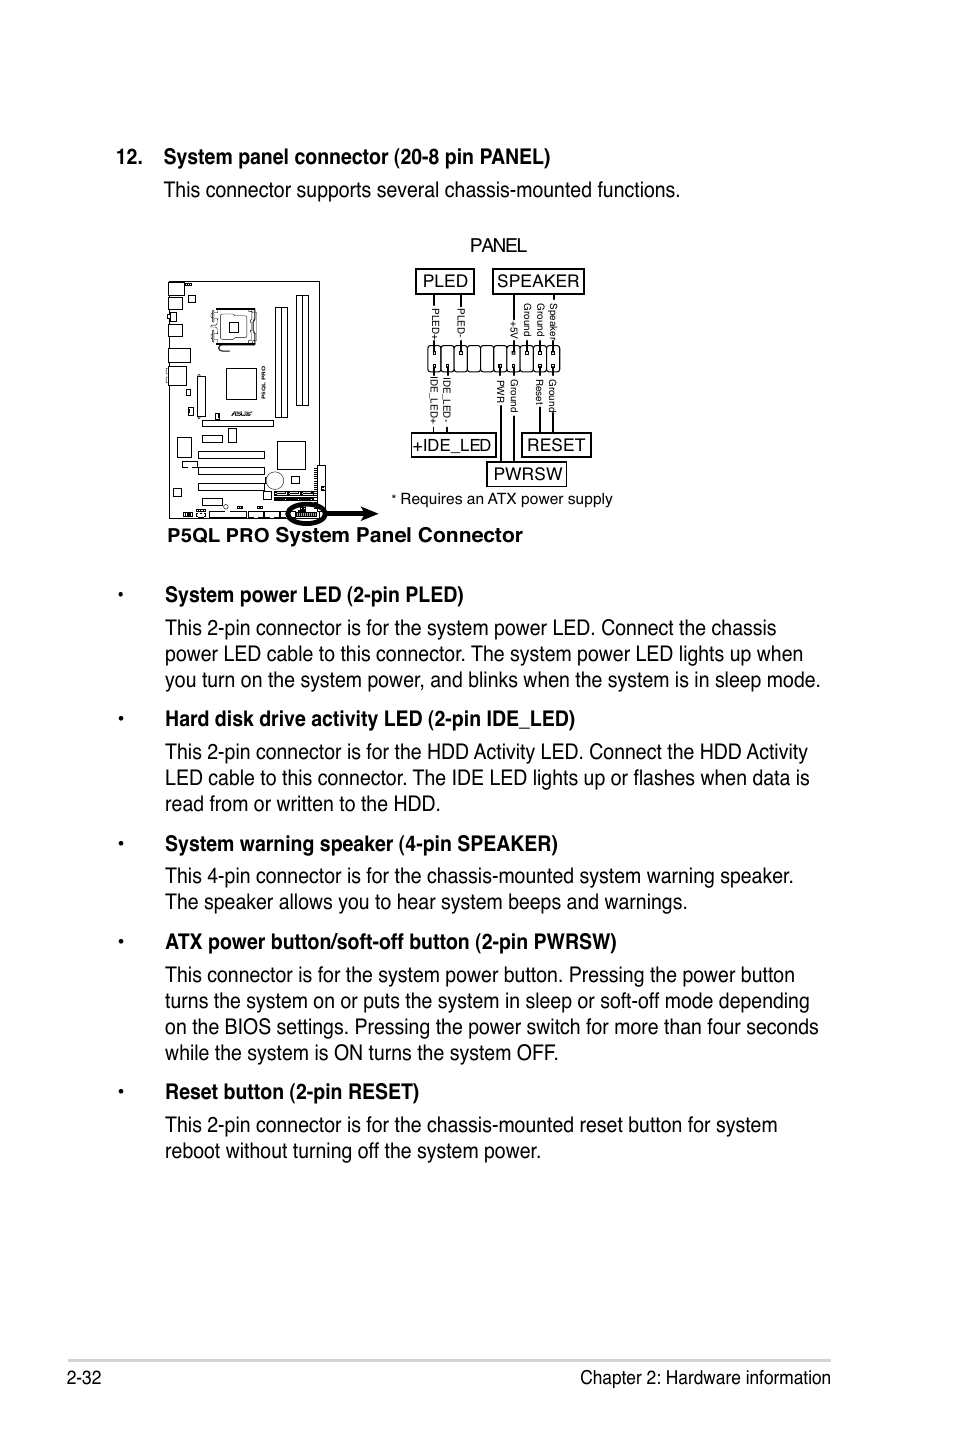 System panel connector | Asus P5QL PRO User Manual | Page 54 / 148